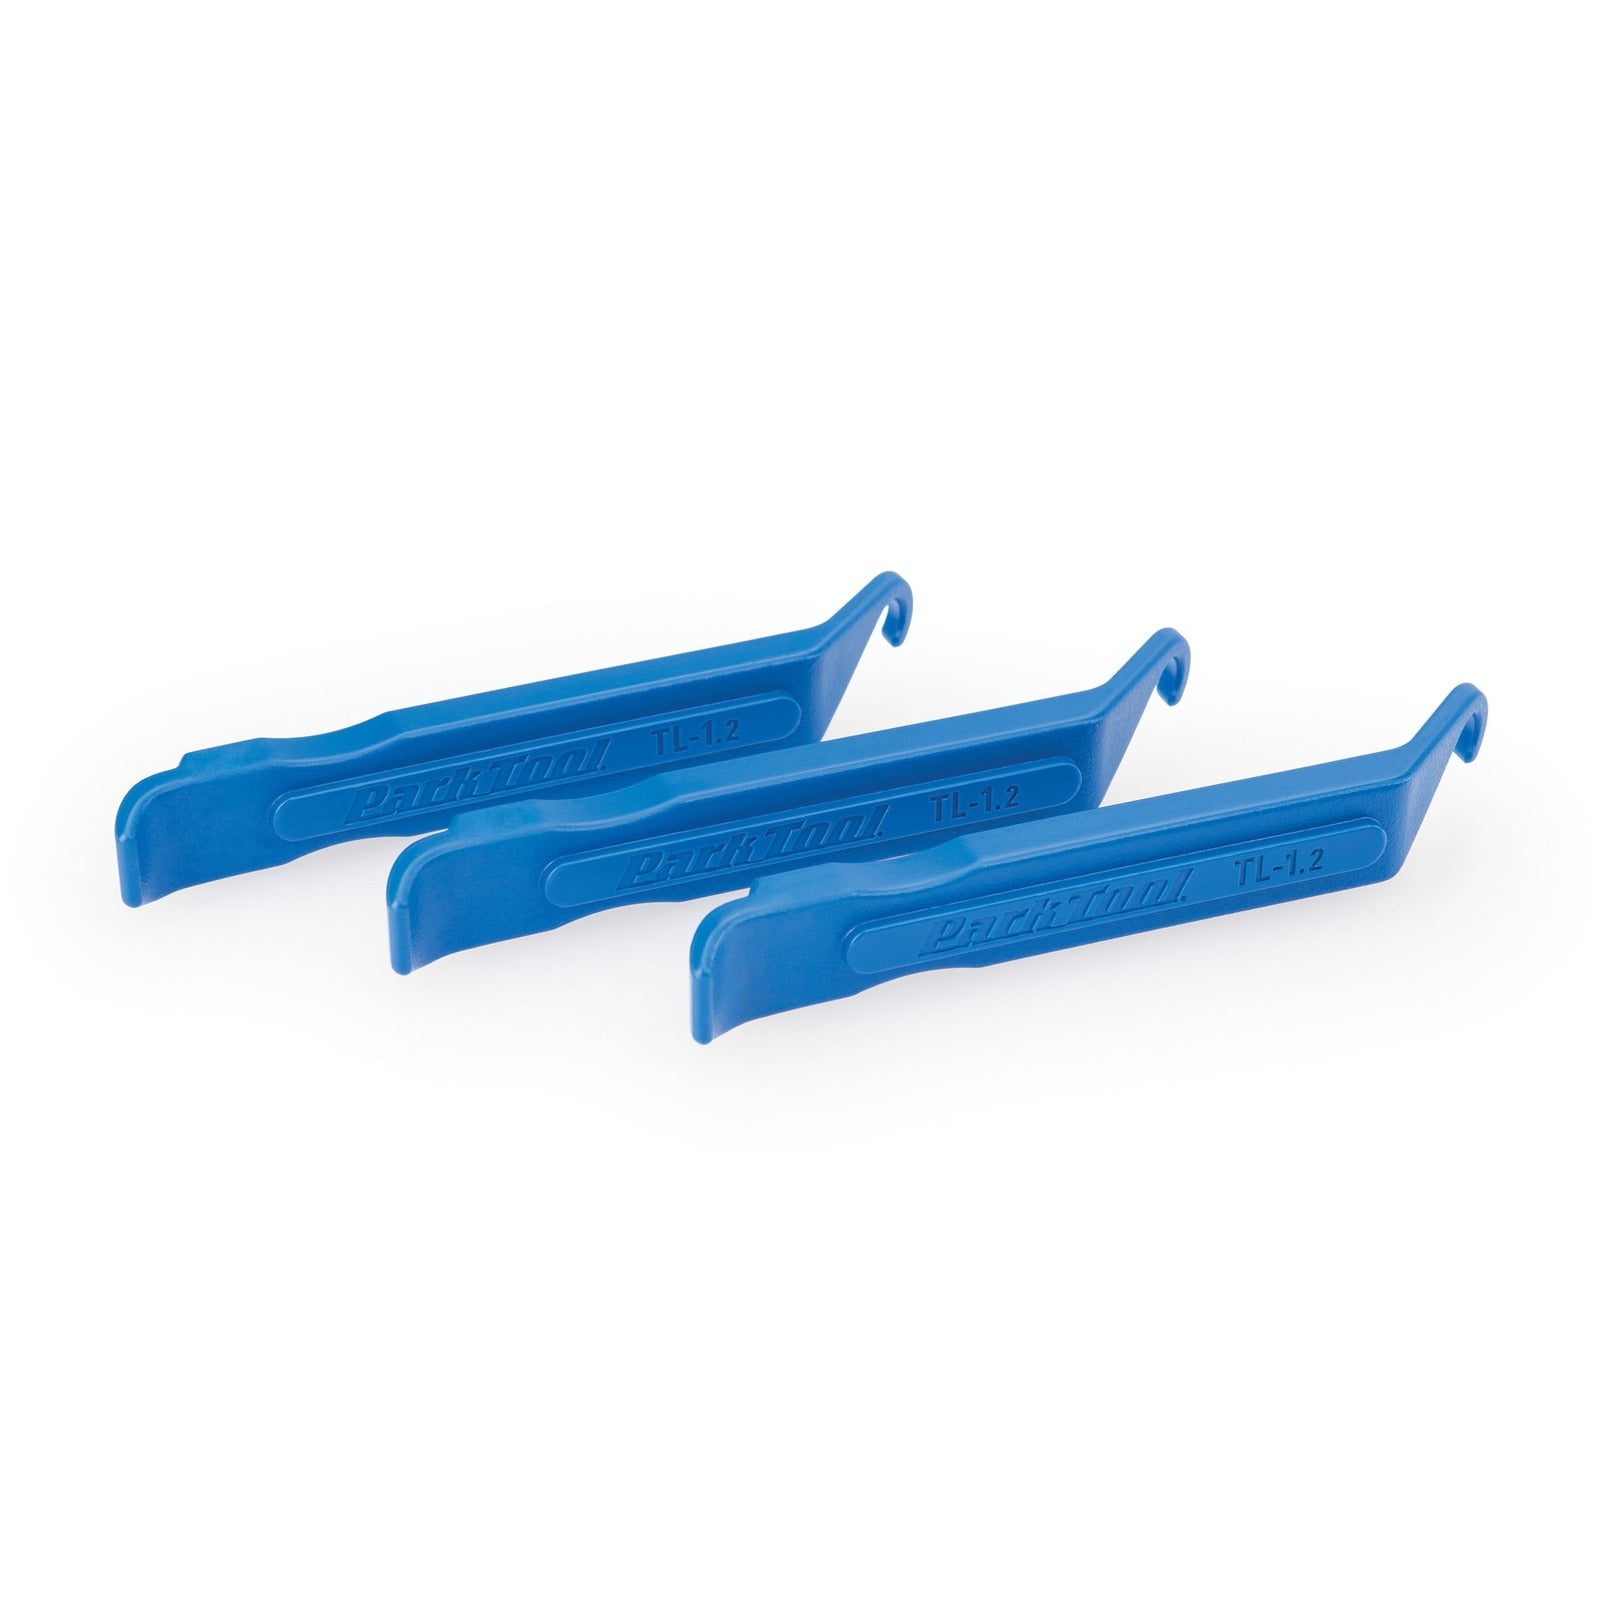 Park Tool Tyre Level Set of 3 (TL-1.2)